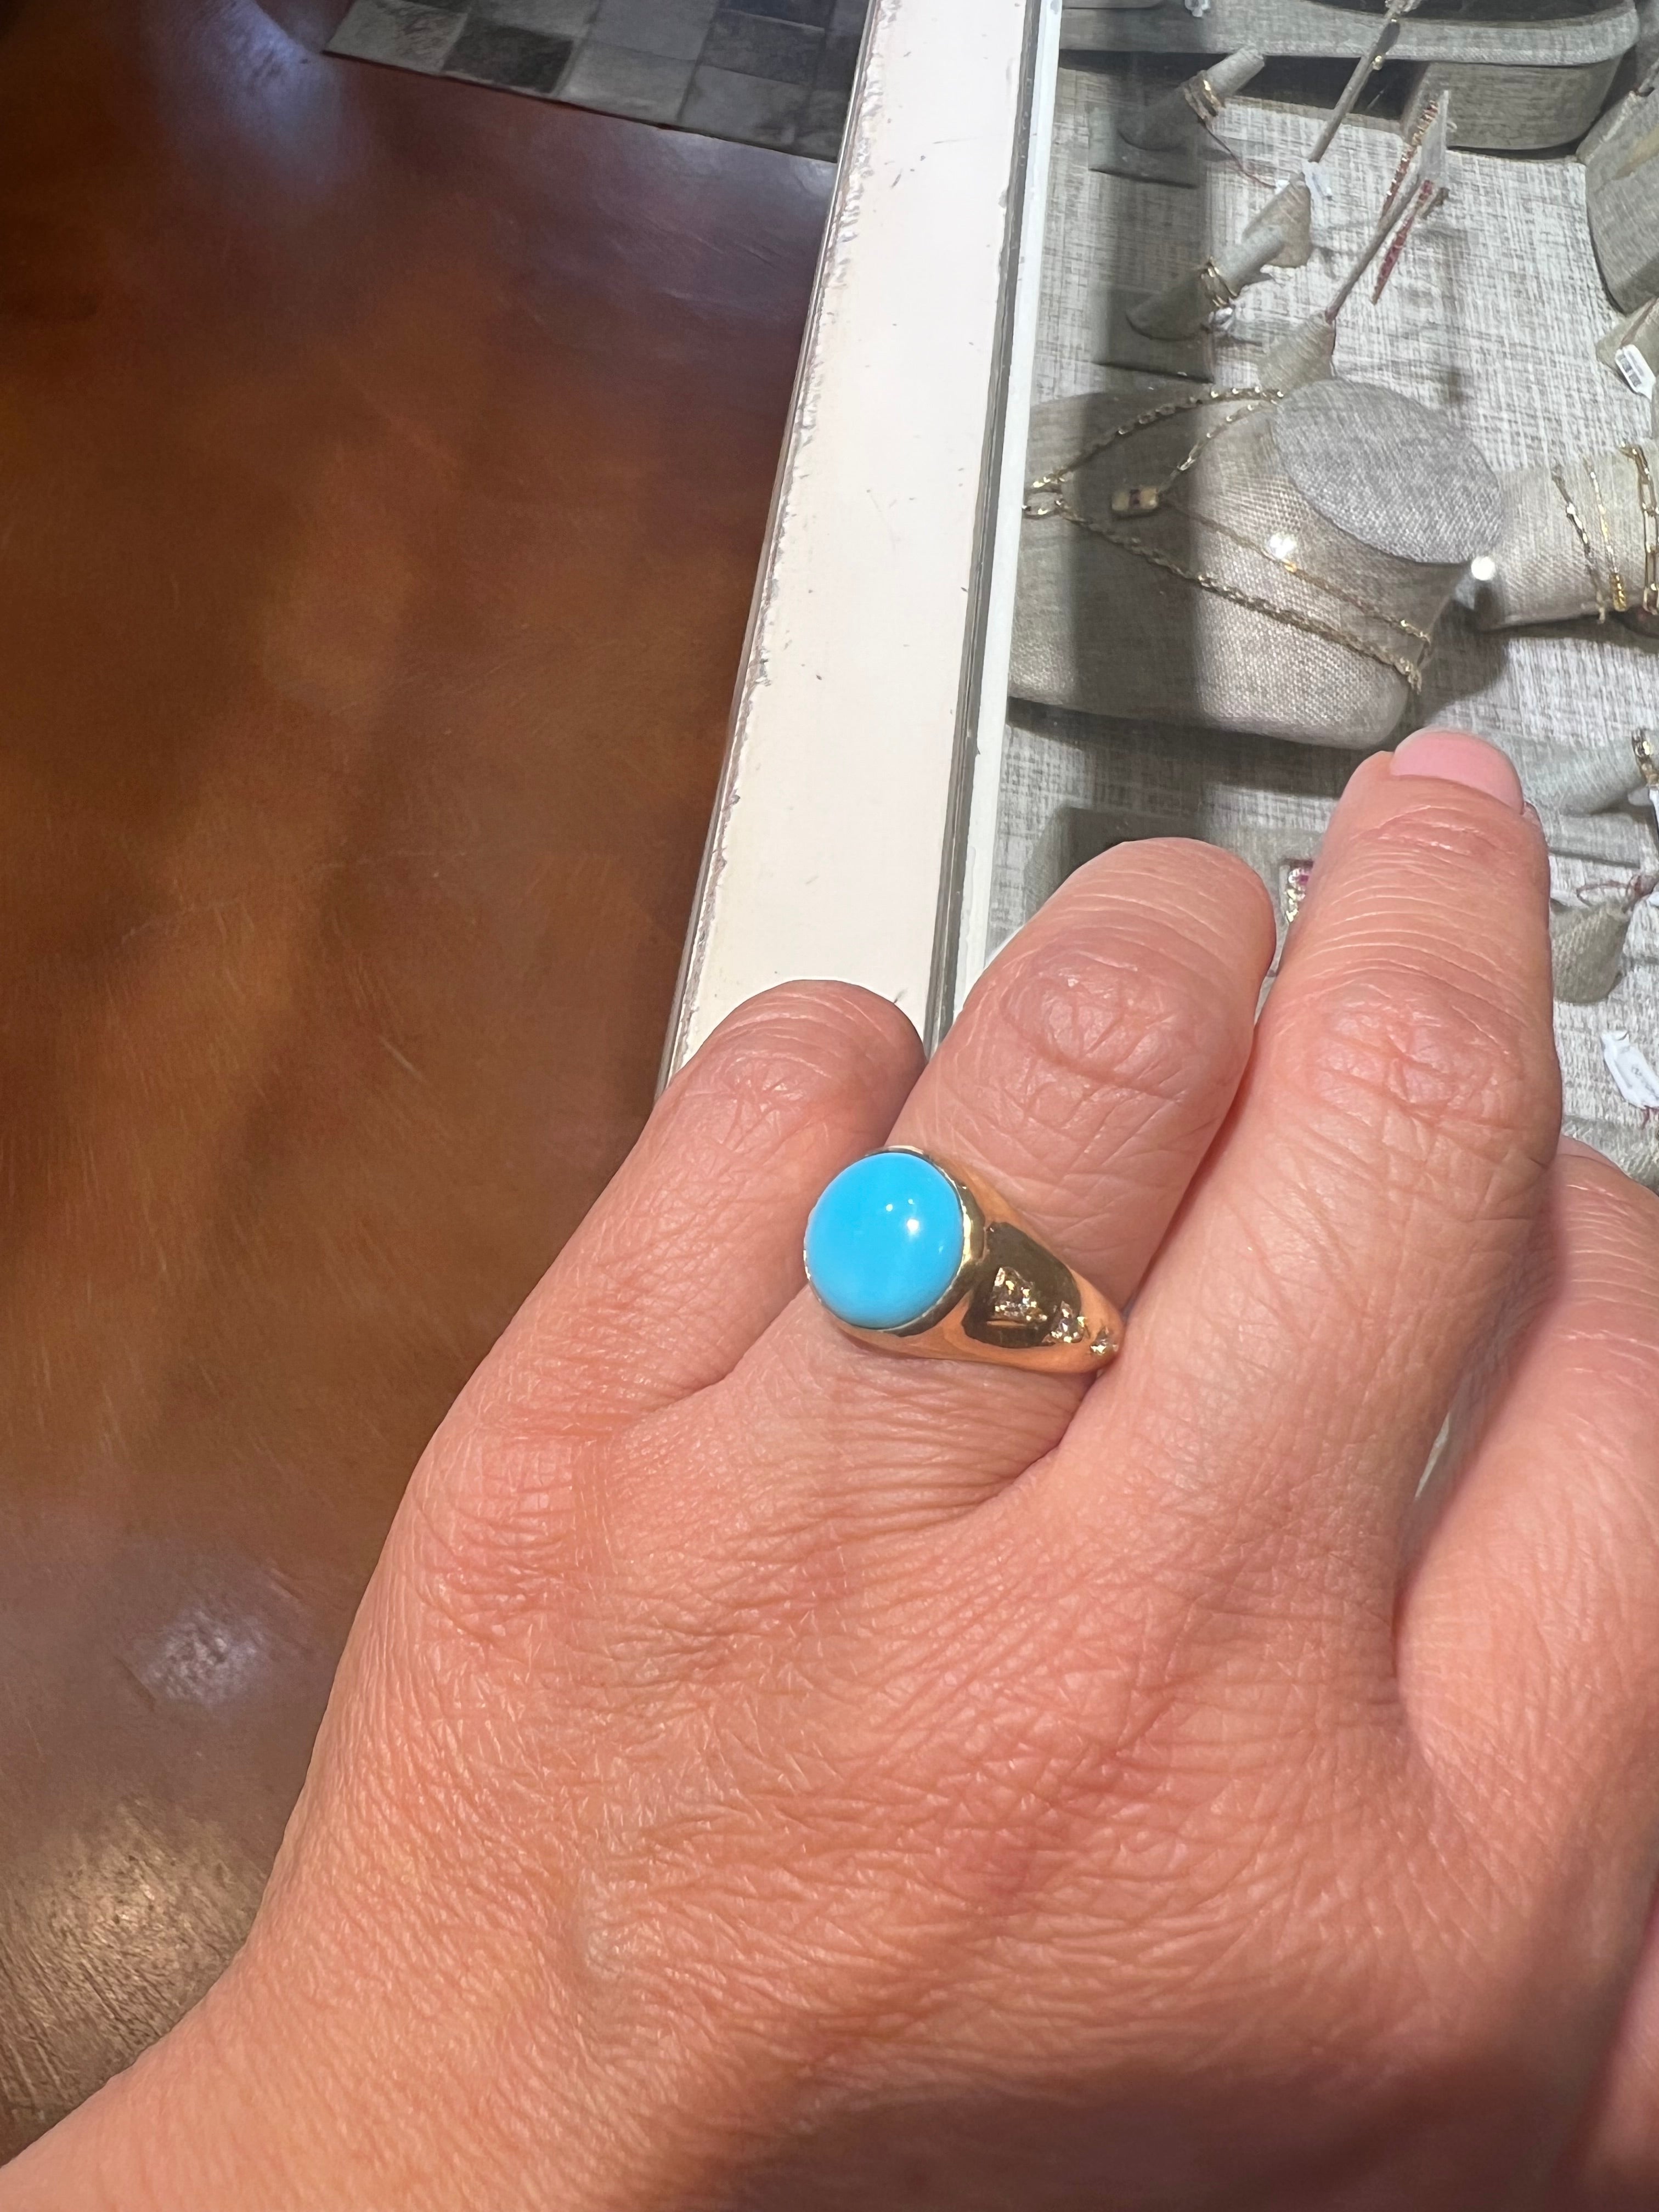 Oval Turquoise Diamond Ring in 14k